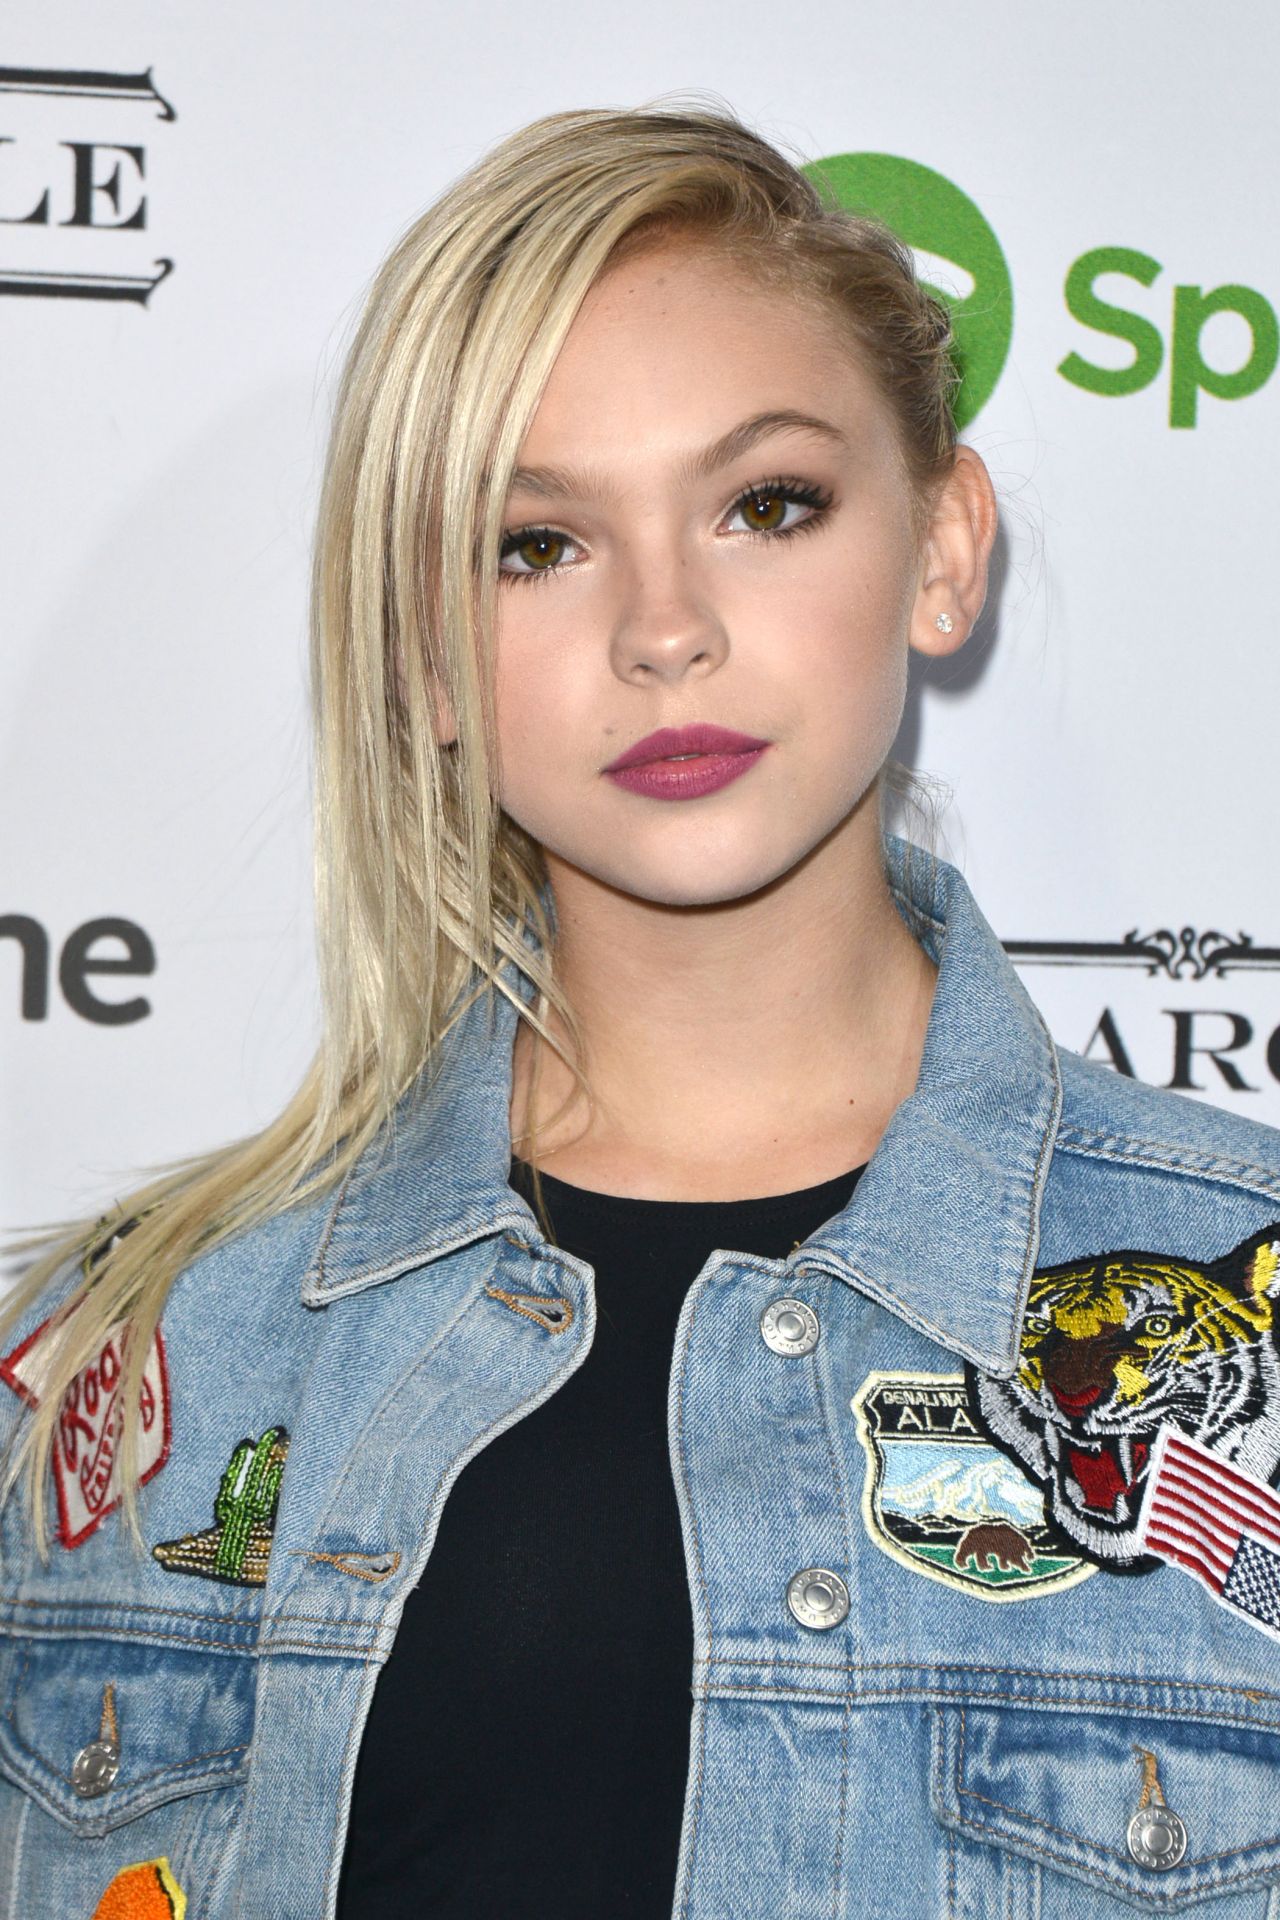 Jordyn Jones Style Clothes Outfits And Fashion Page 38 Of 40 Celebmafia